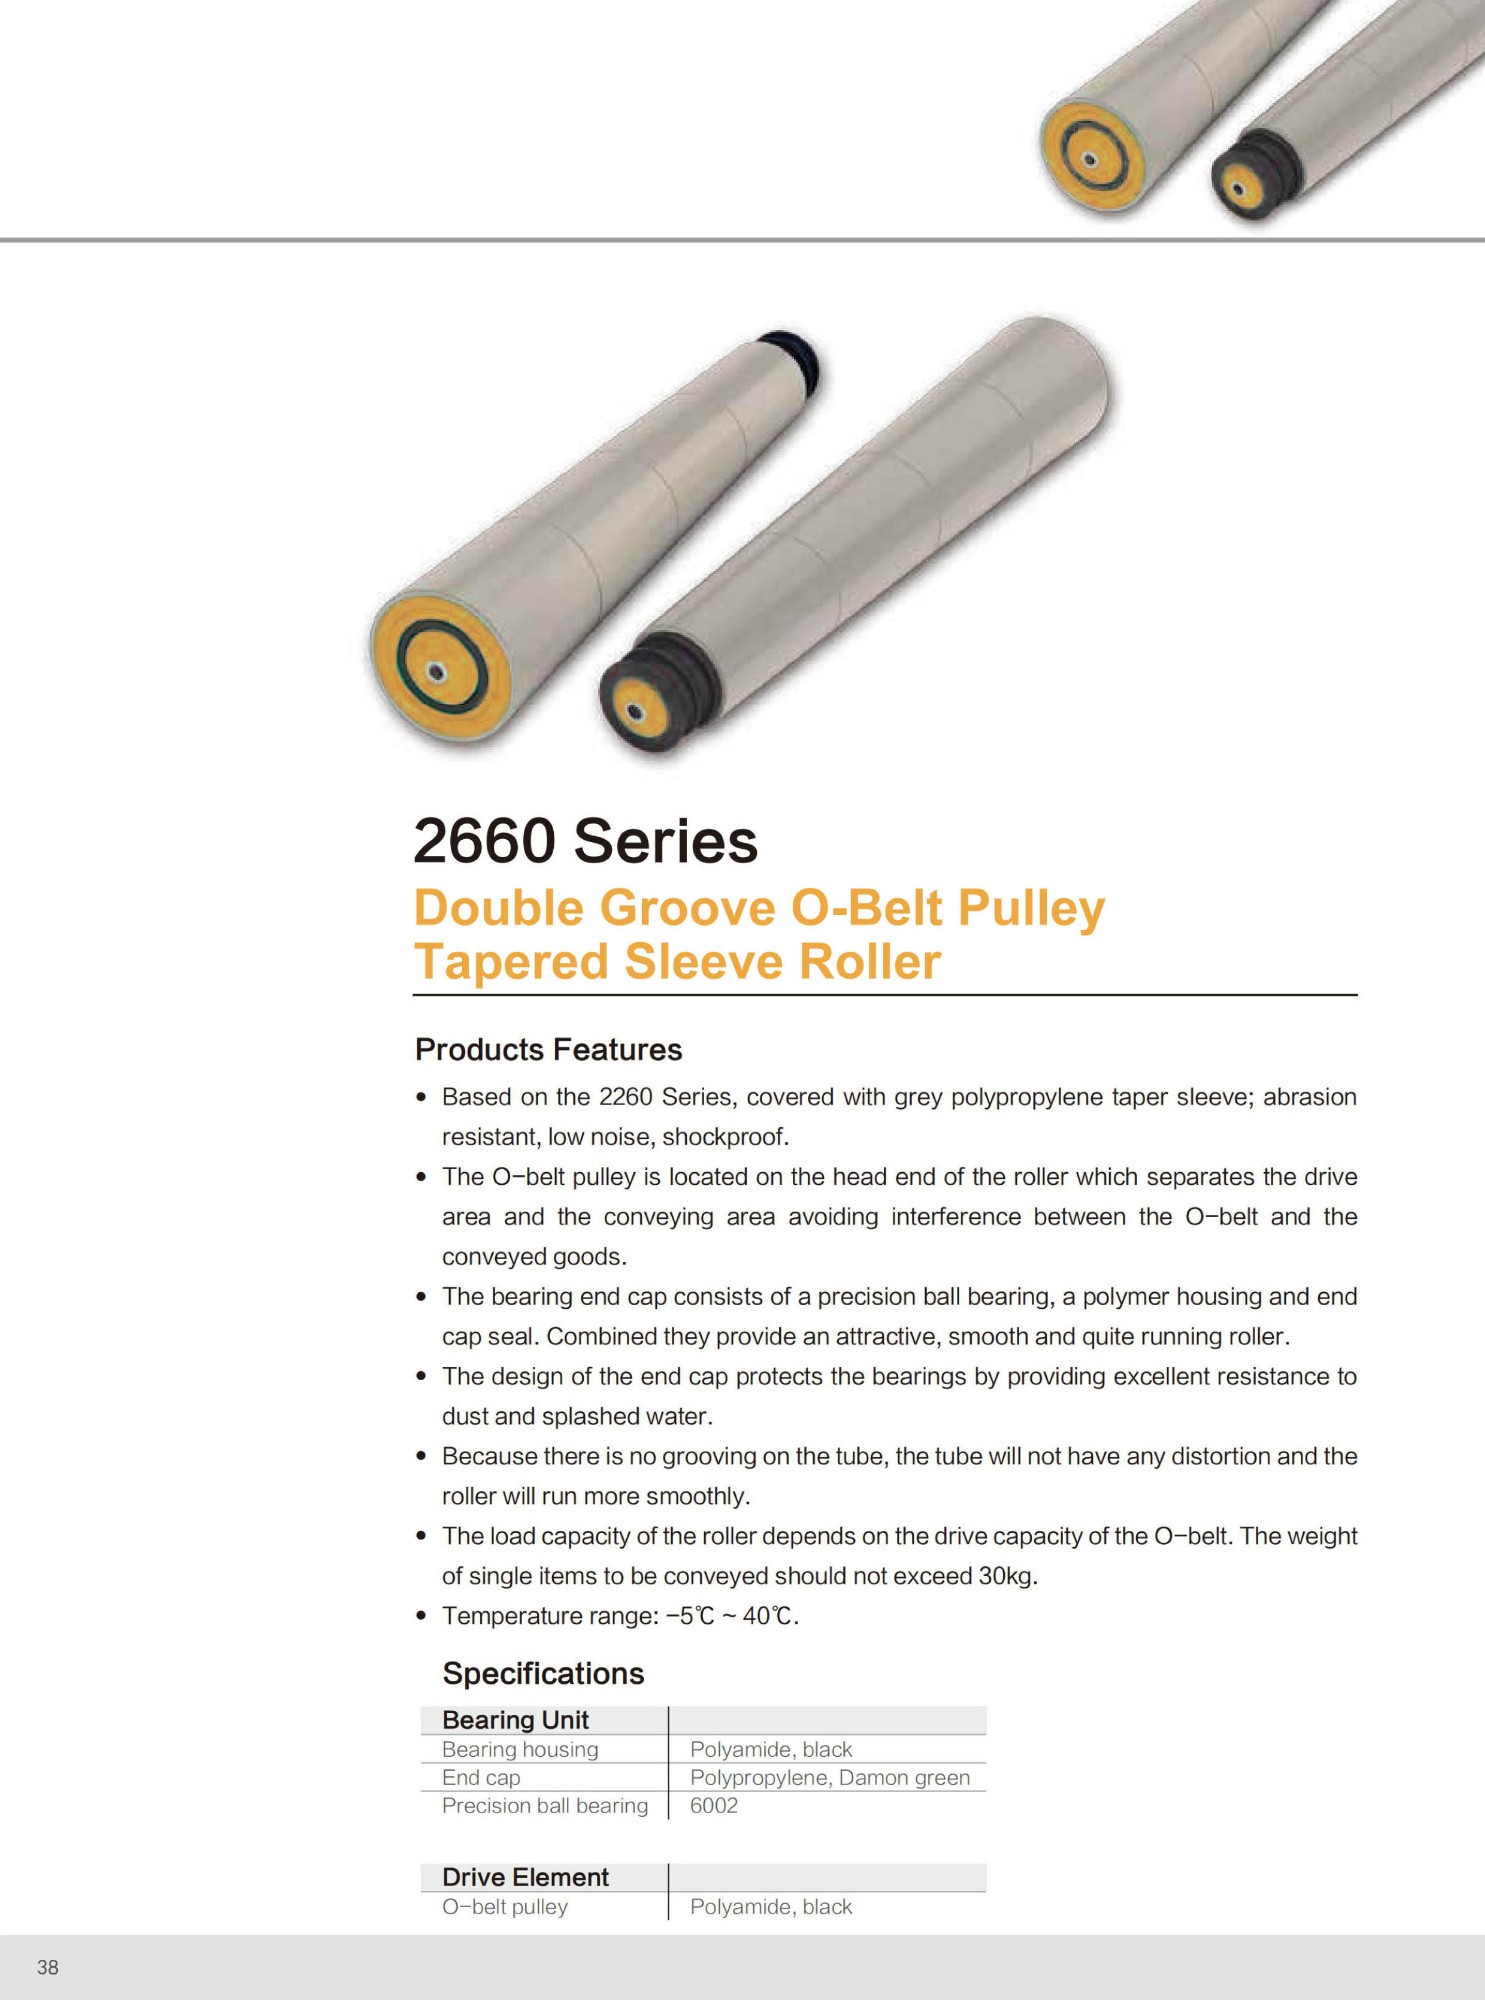 2660 Series Double Groove O-Belt Pulley Tapered Sleeve Roller